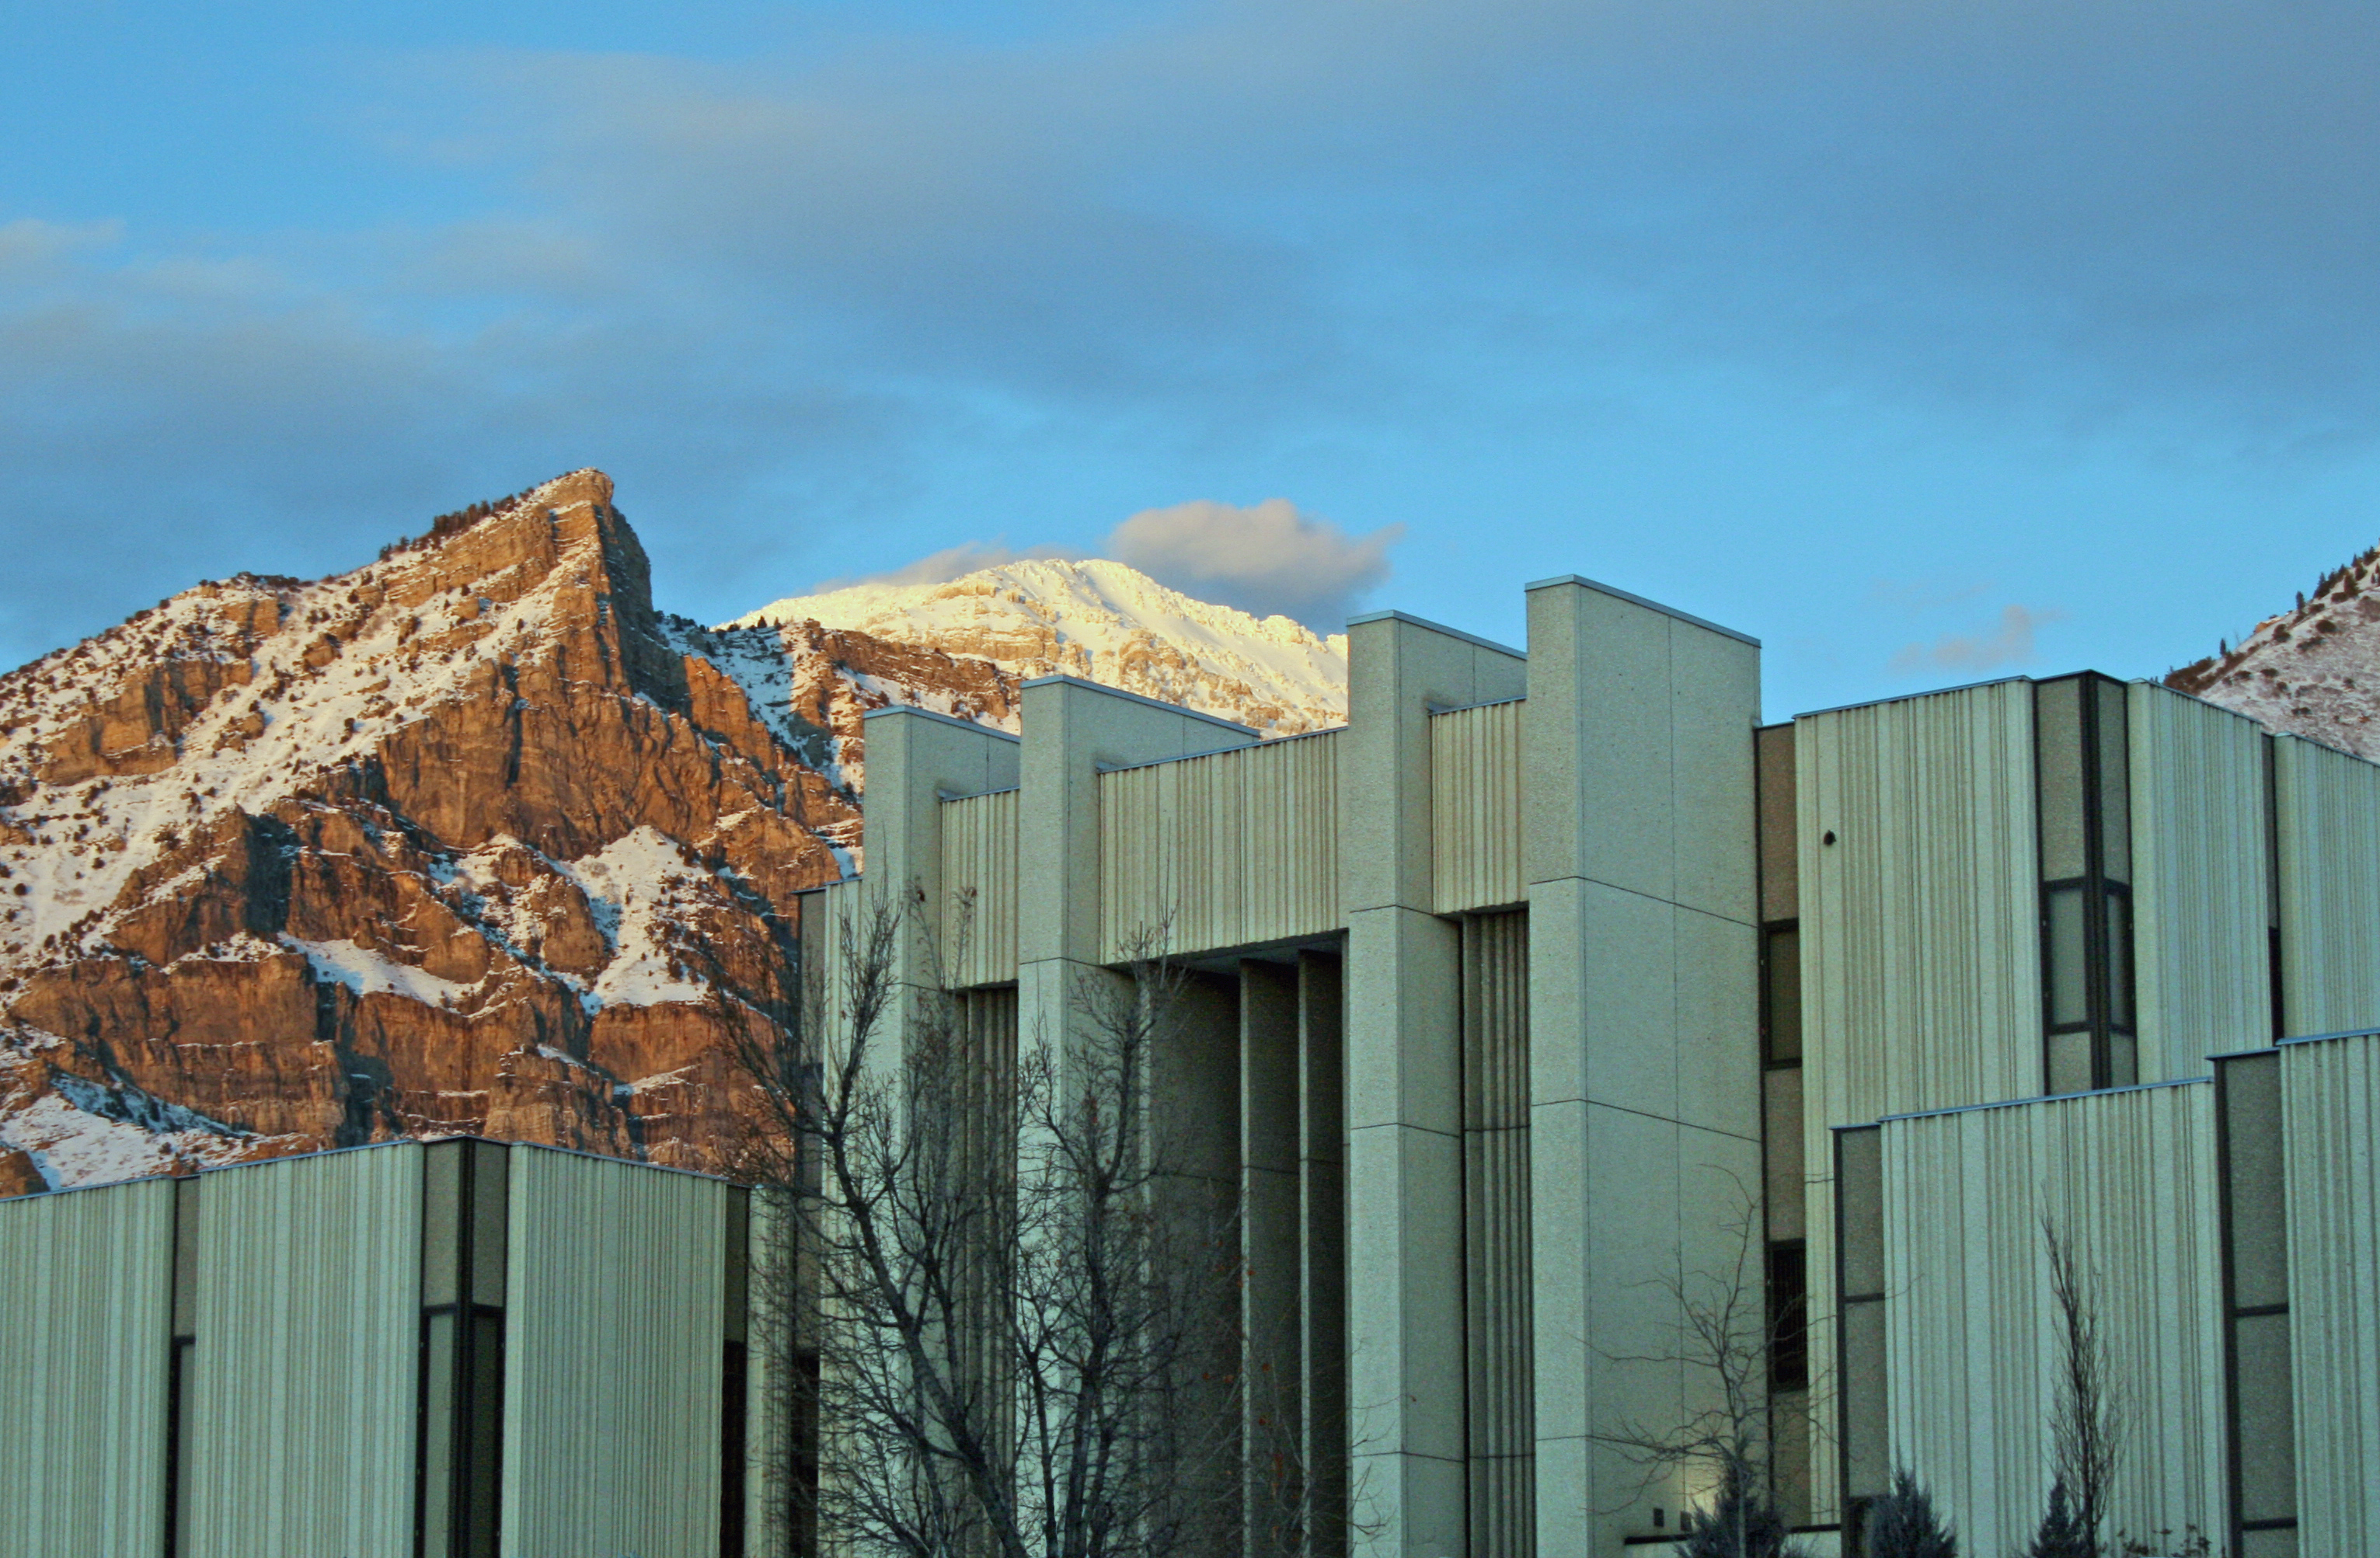 <p><a href="https://www.byu.edu/" rel="noreferrer noopener">Brigham Young University</a> sits at the base of Utah’s Wasatch Mountains and is home to some striking modern buildings such as the J. Reuben Clark Law School (pictured).</p>